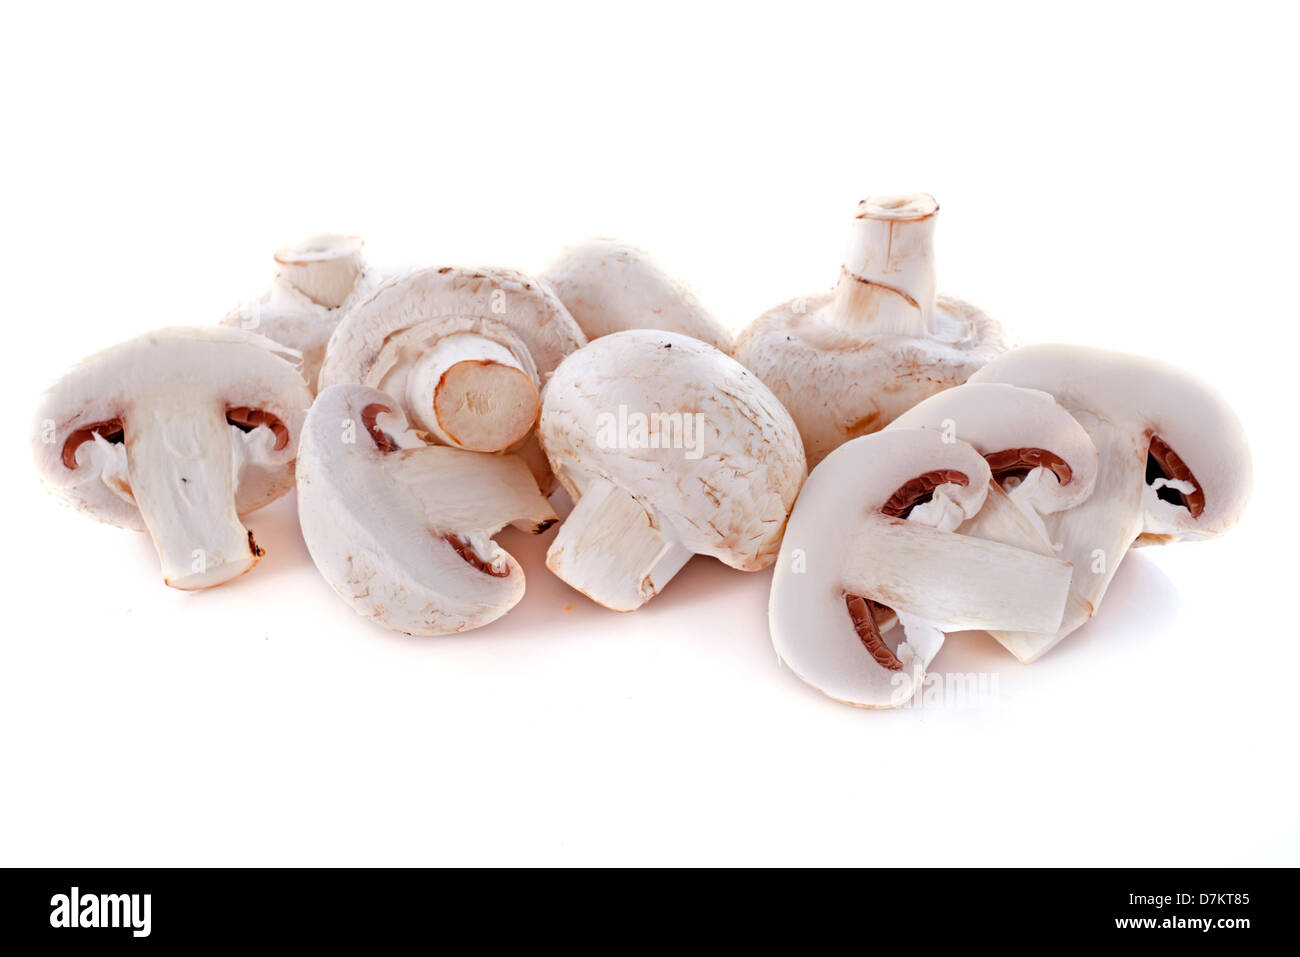 button mushrooms in front of white background Stock Photo